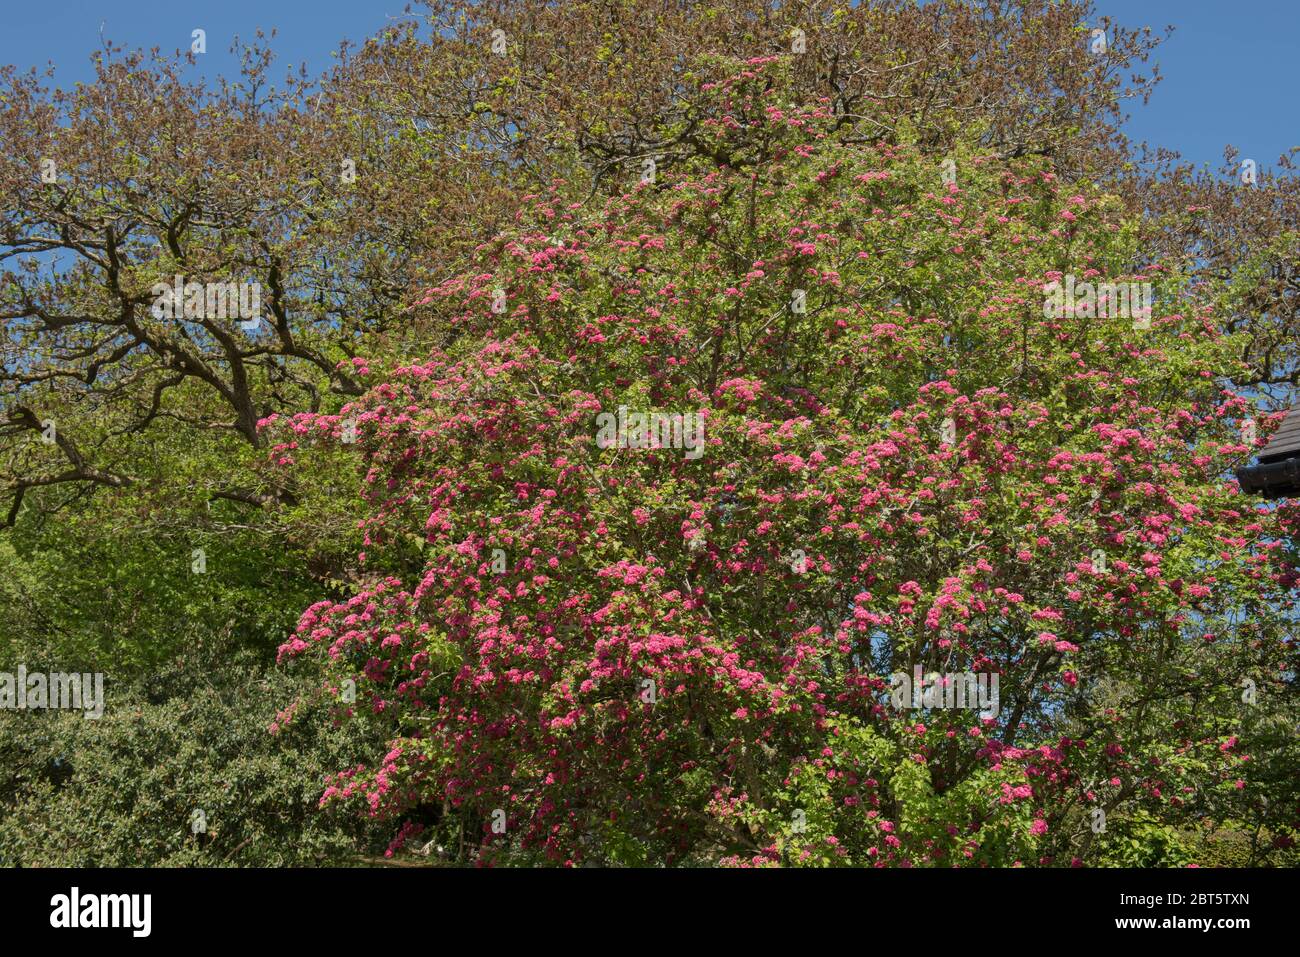 Spring Flowering Deciduous Double Pink Hawthorn Tree (Crataegus laevigata 'Rosea Flore Pleno') with a Bright Blue Sky Background in a Garden Stock Photo